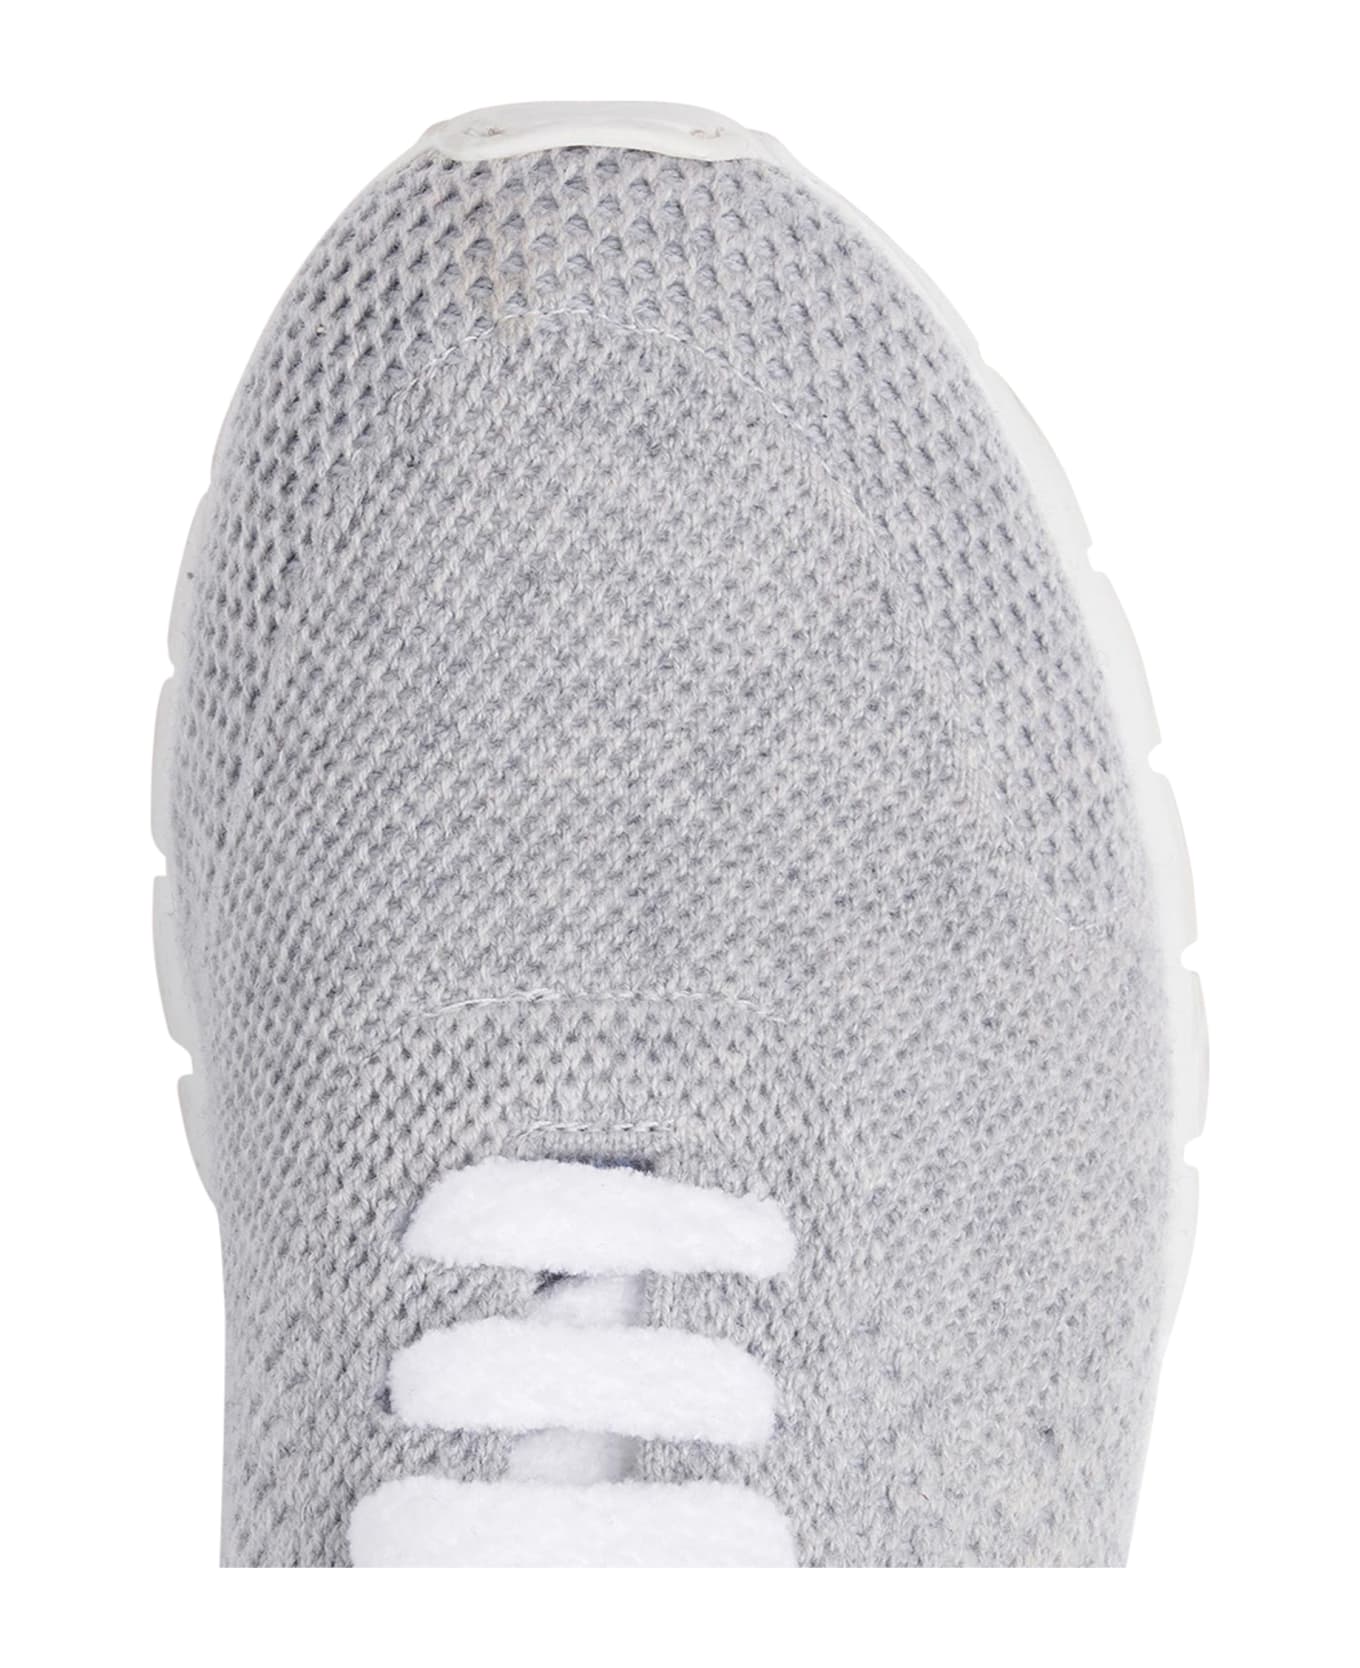 Kiton Sneakers Shoes from Cashmere - MEDIUM GREY